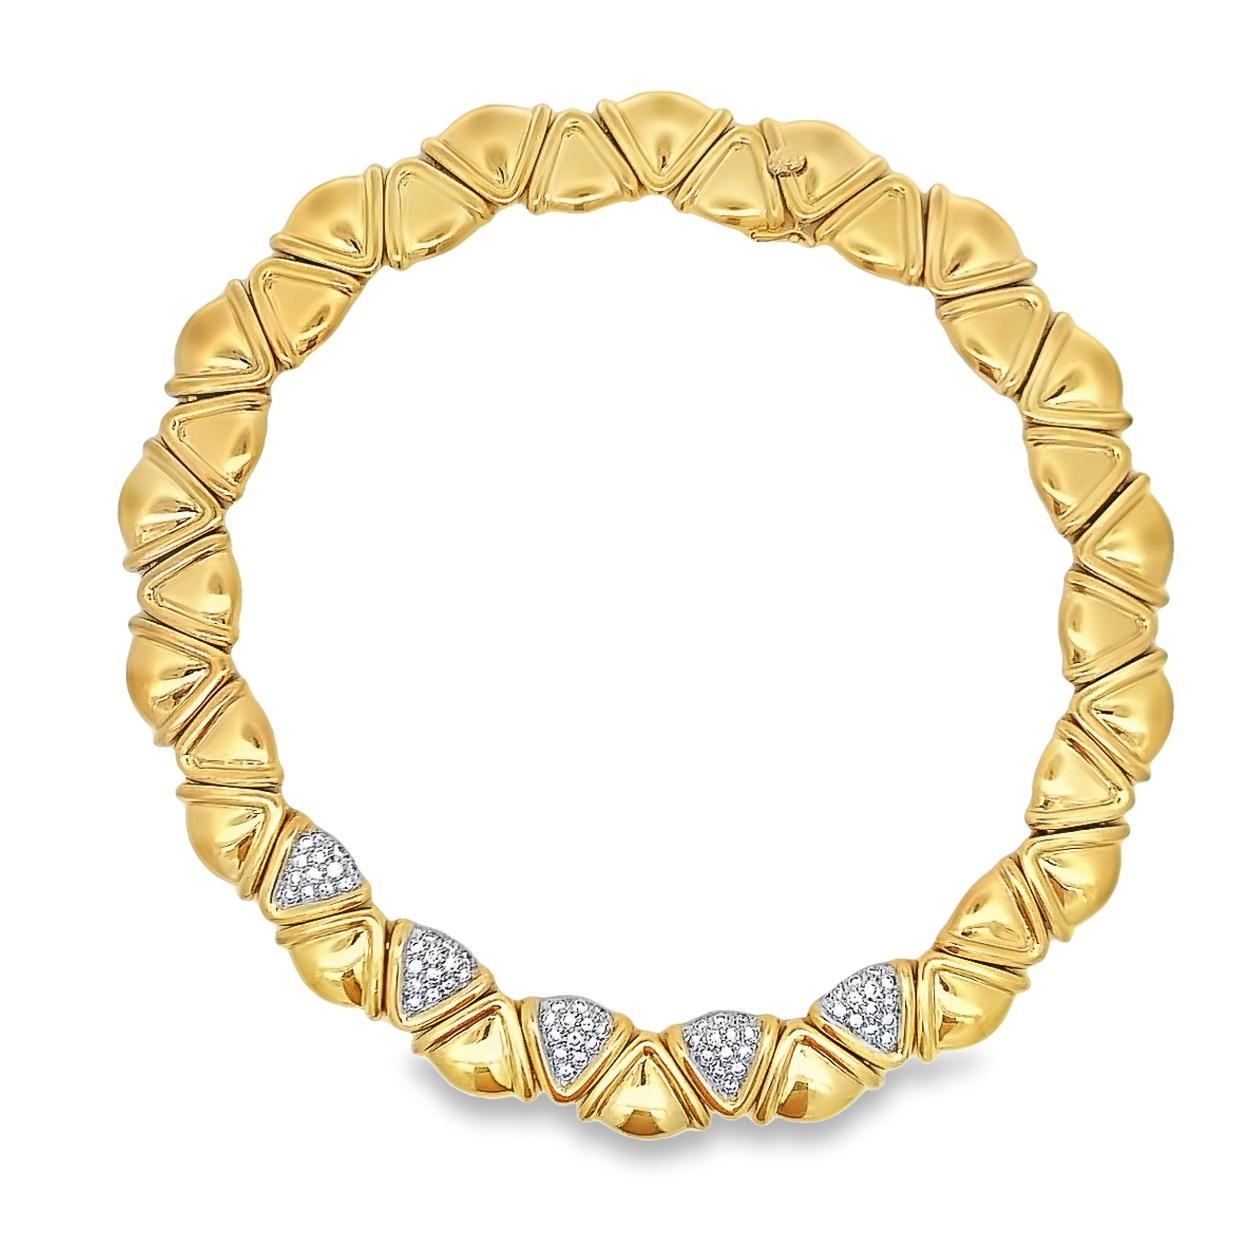 Diamond Choker Necklace

 A necklace featuring triangular gold links with 5 round cut diamond links towards the center.

Measurements: 14